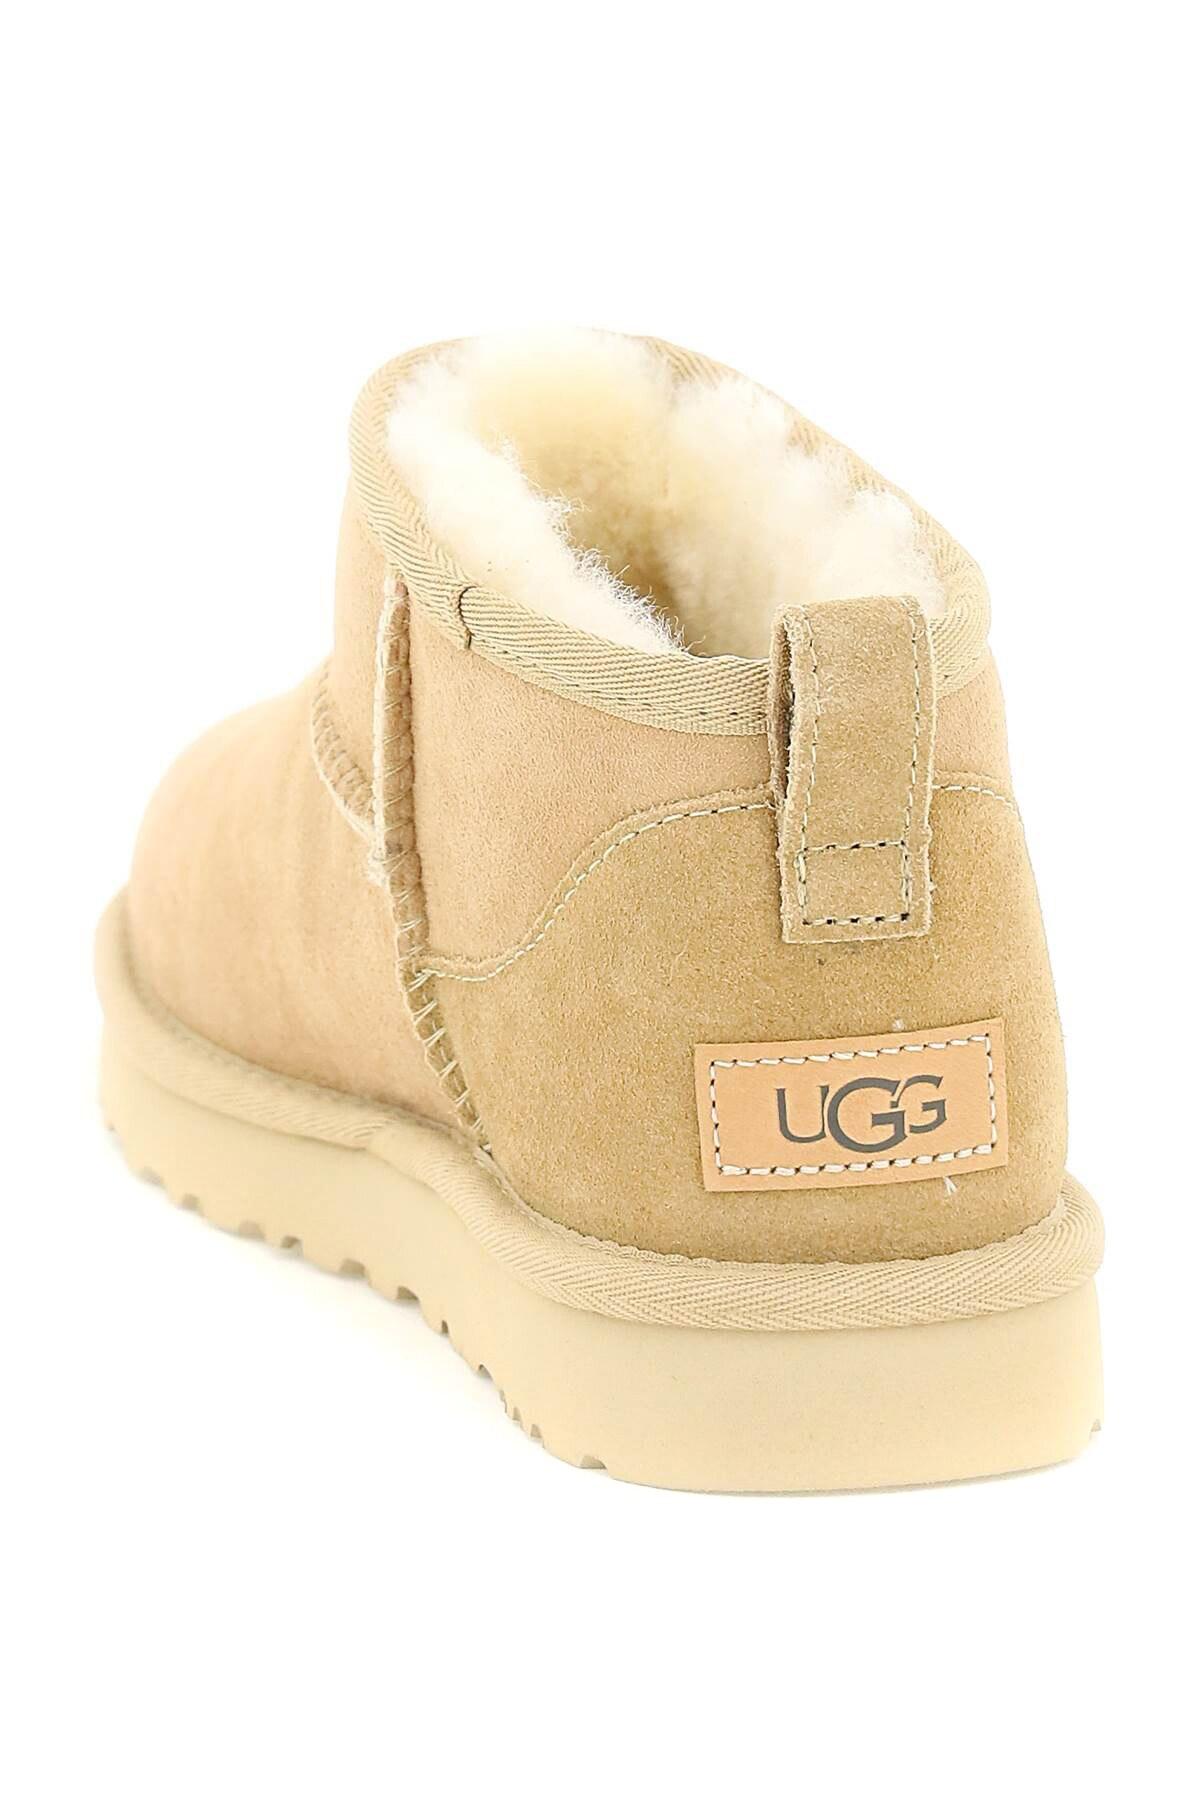 UGG Classic Ultra Mini Boots in Natural | Lyst